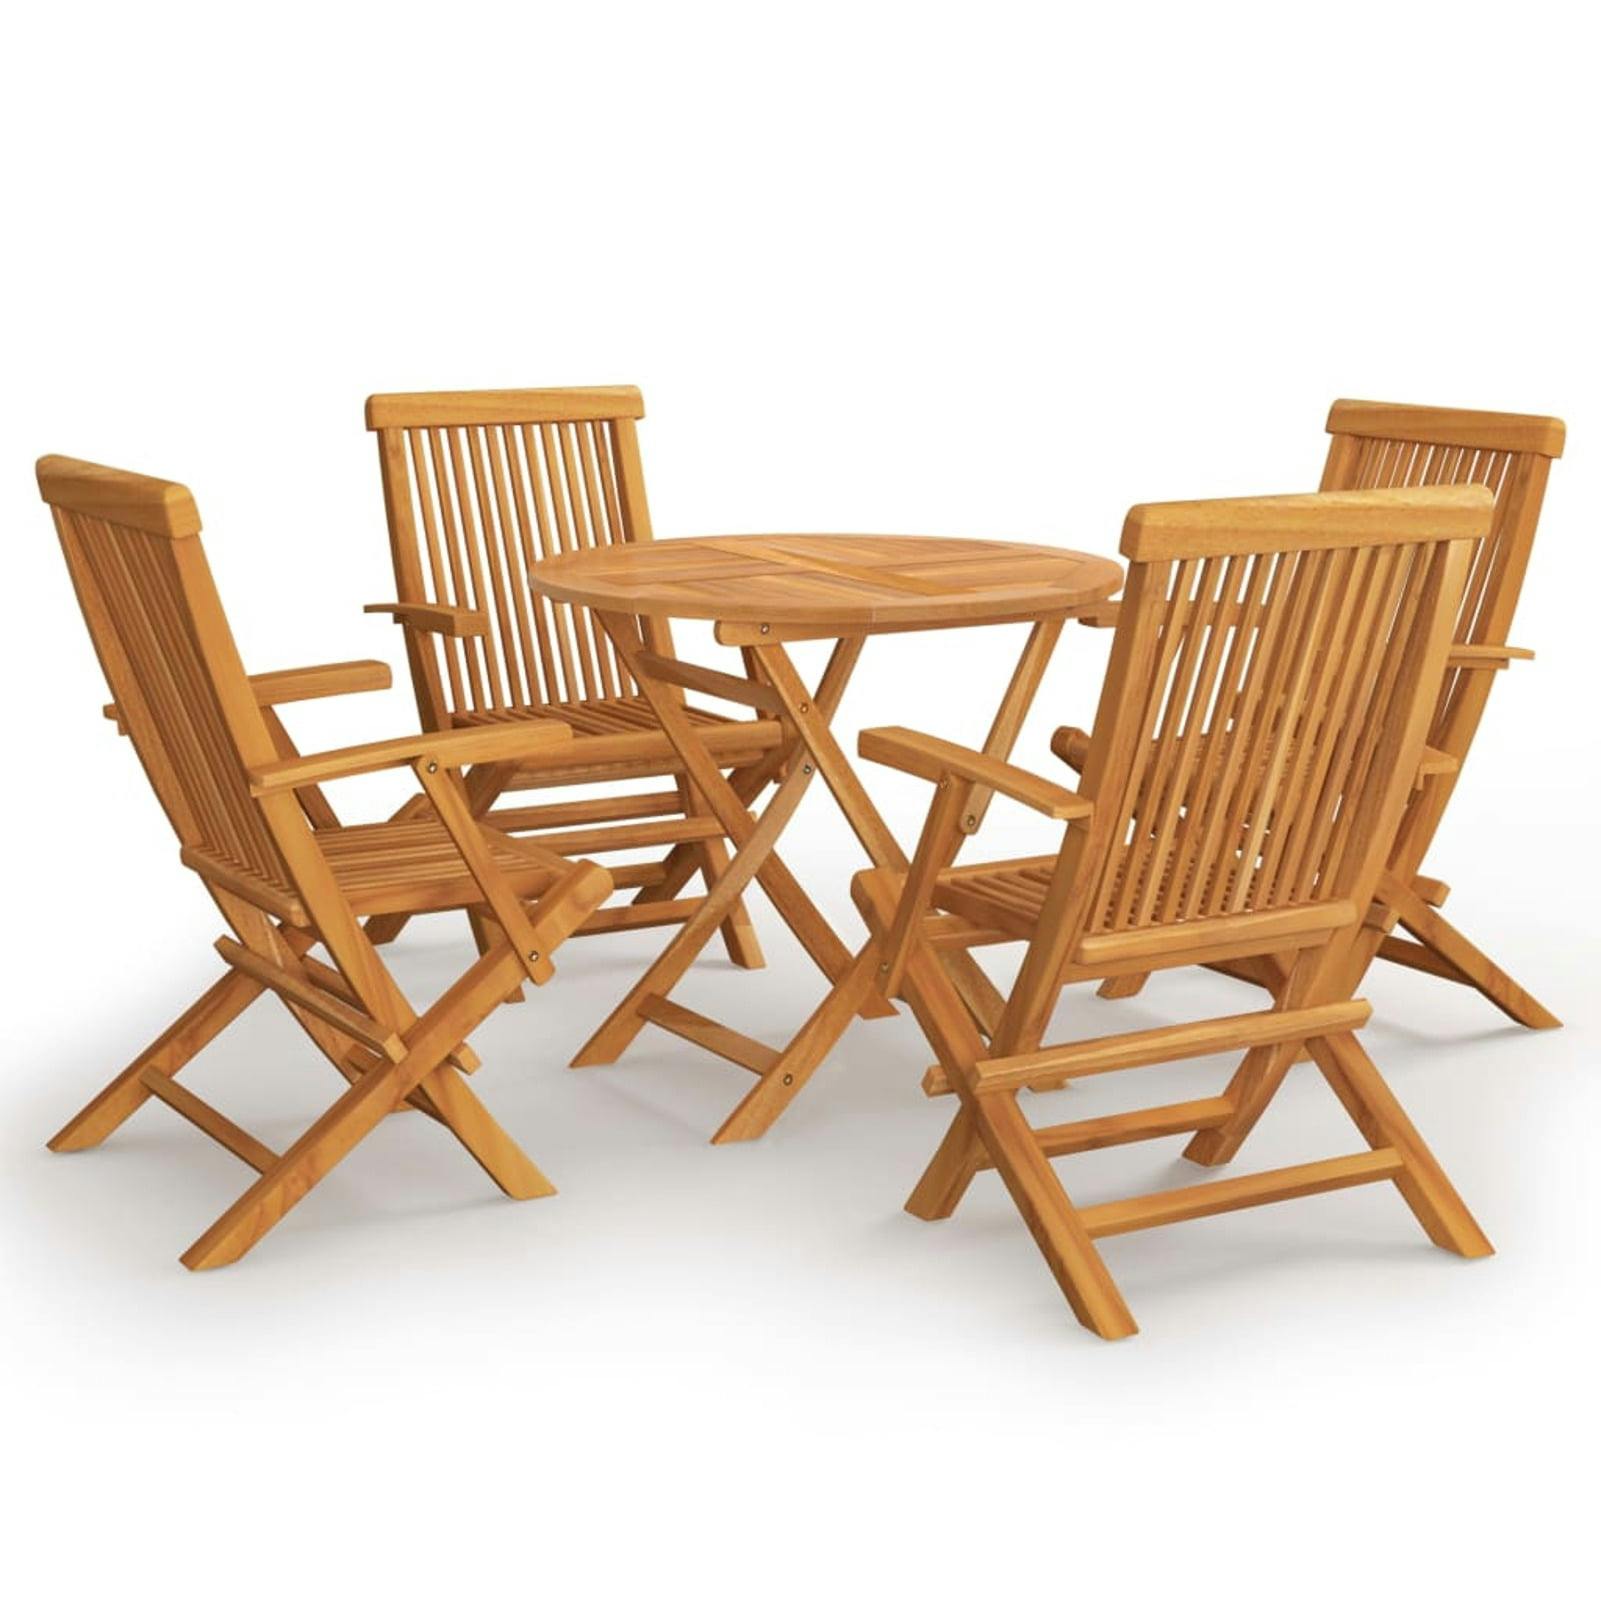 Classic Teak 5-Piece Foldable Outdoor Dining Set with Round Table